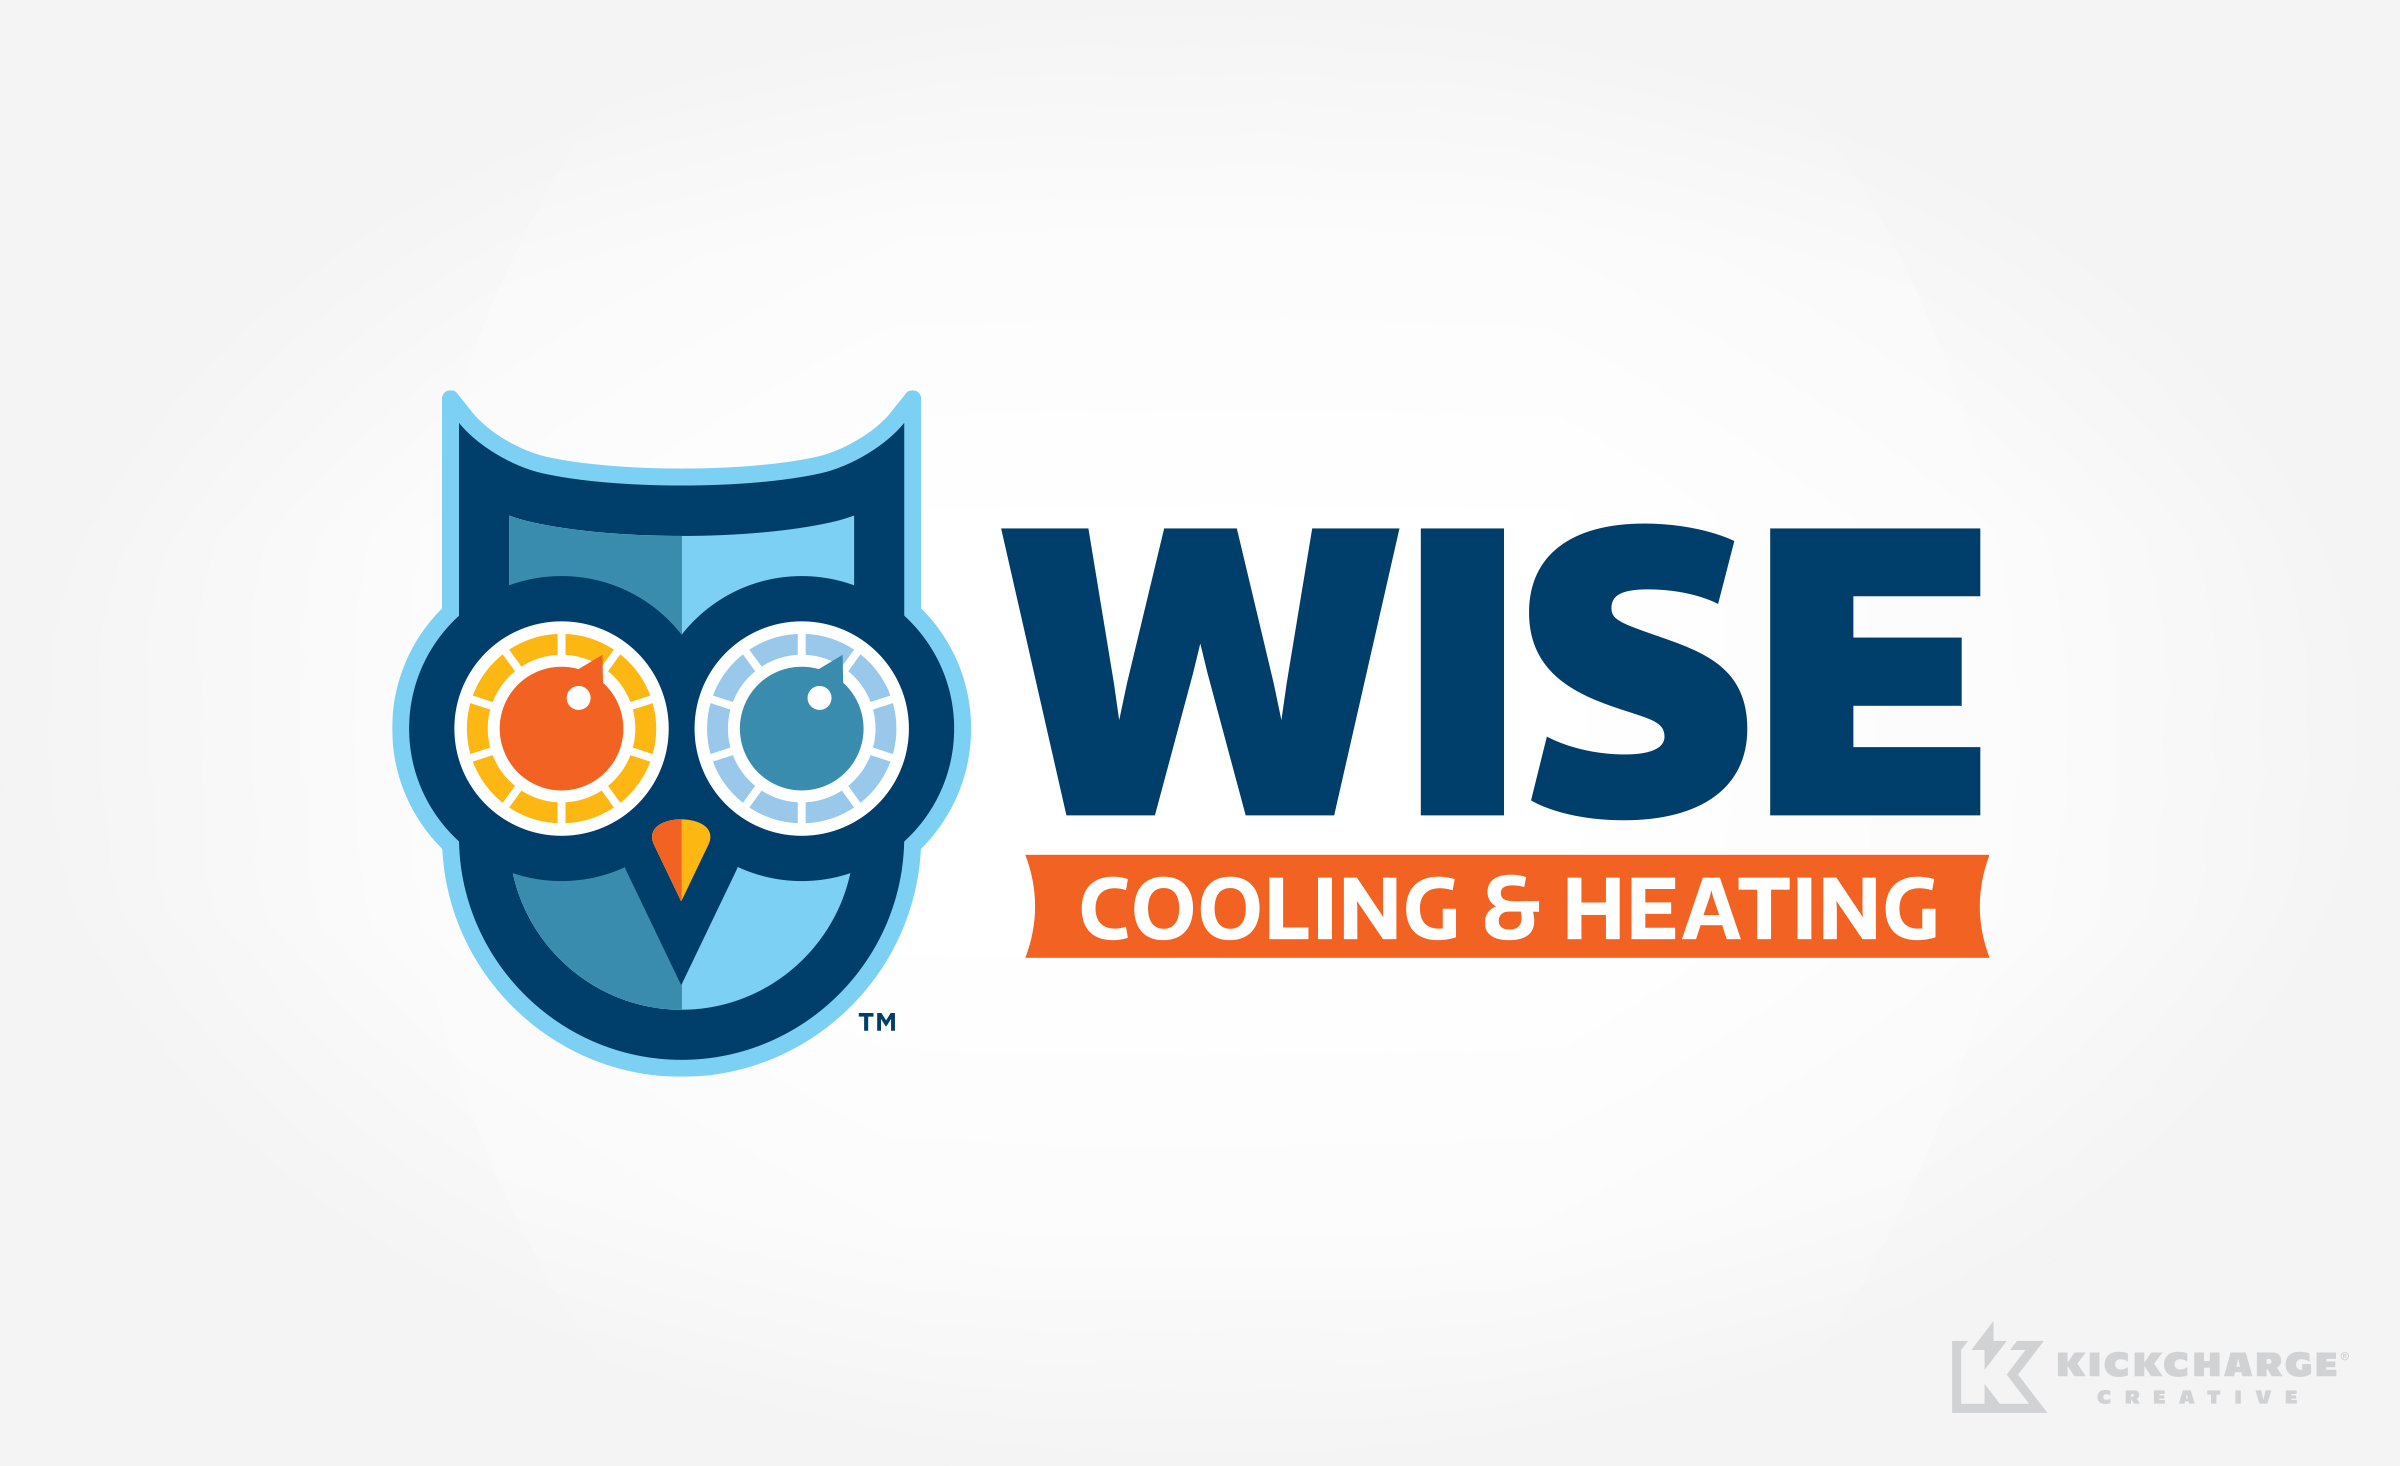 hvac logo for Wise Cooling & Heating